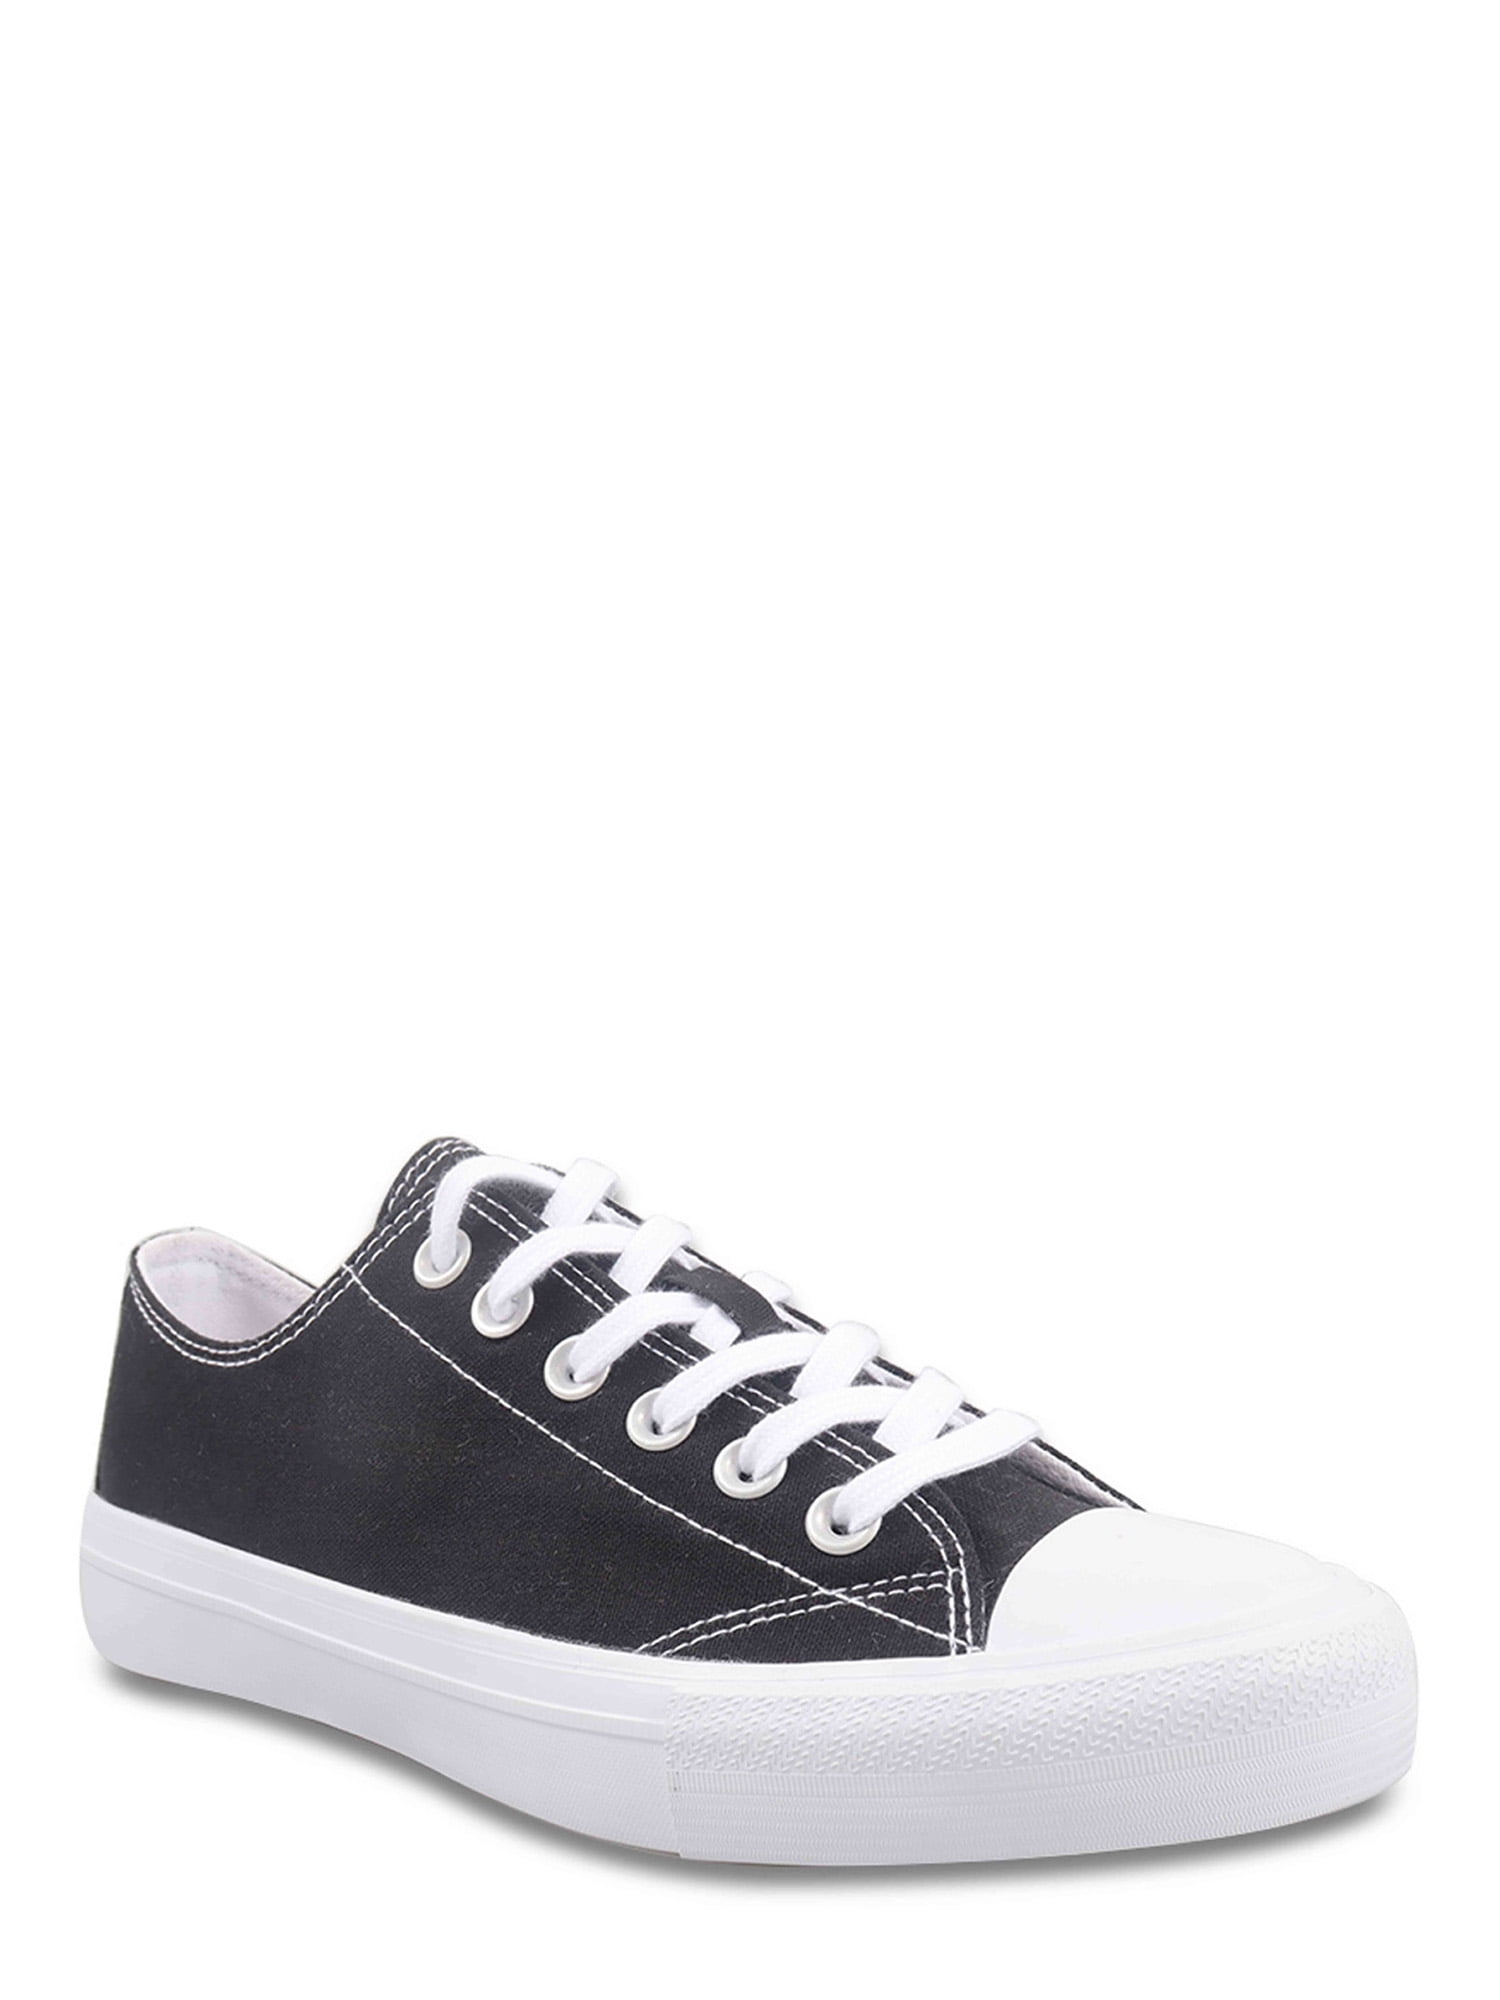 No Boundaries Women's Classic Lace Up Casual Sneakers